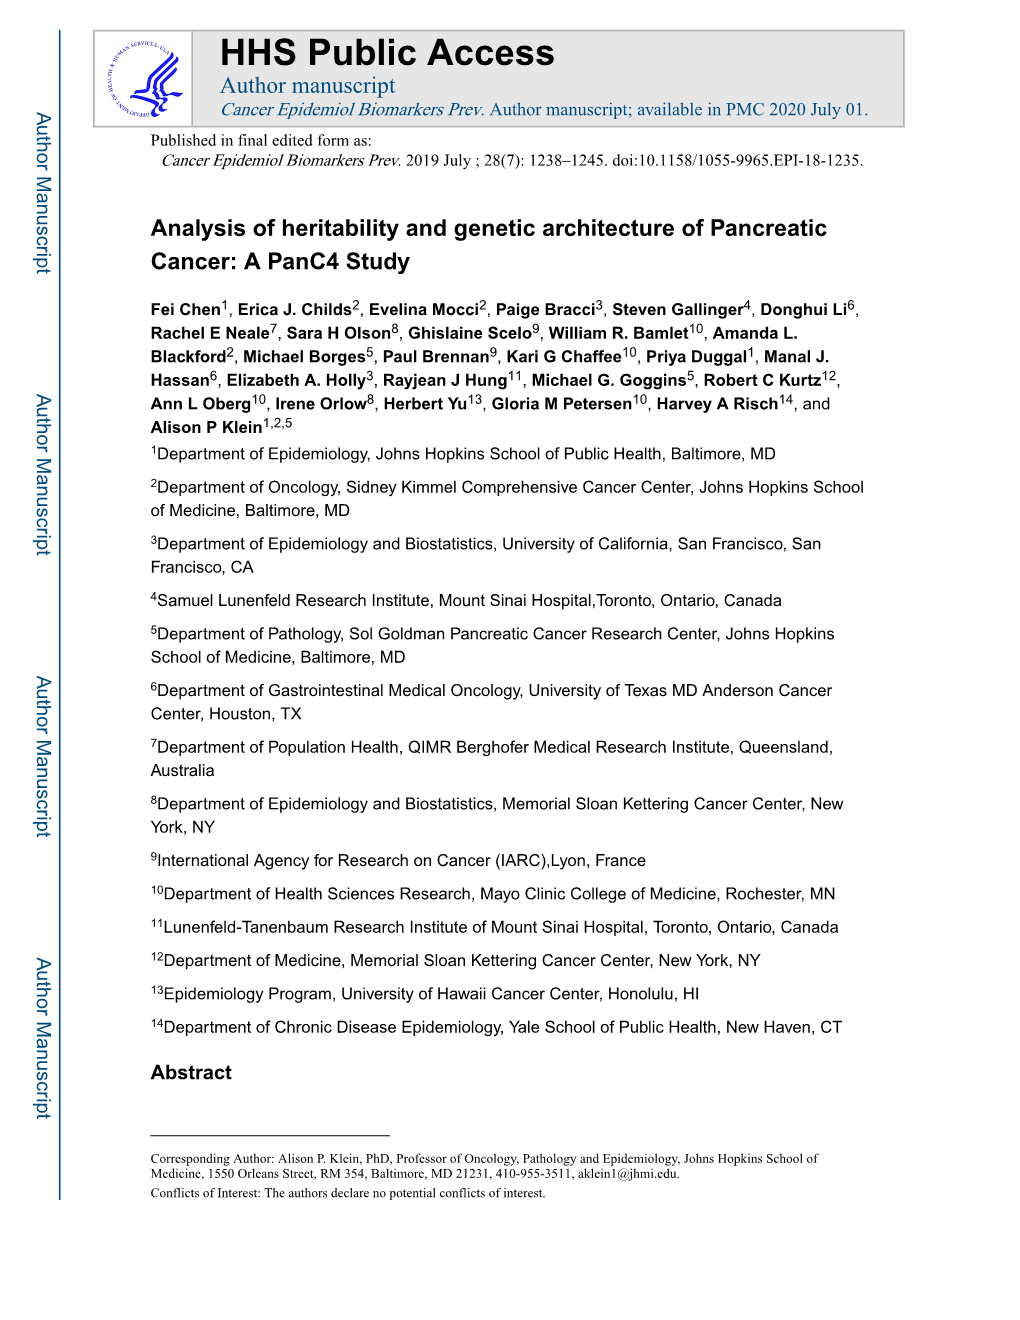 Analysis of Heritability and Genetic Architecture of Pancreatic Cancer: a Panc4 Study